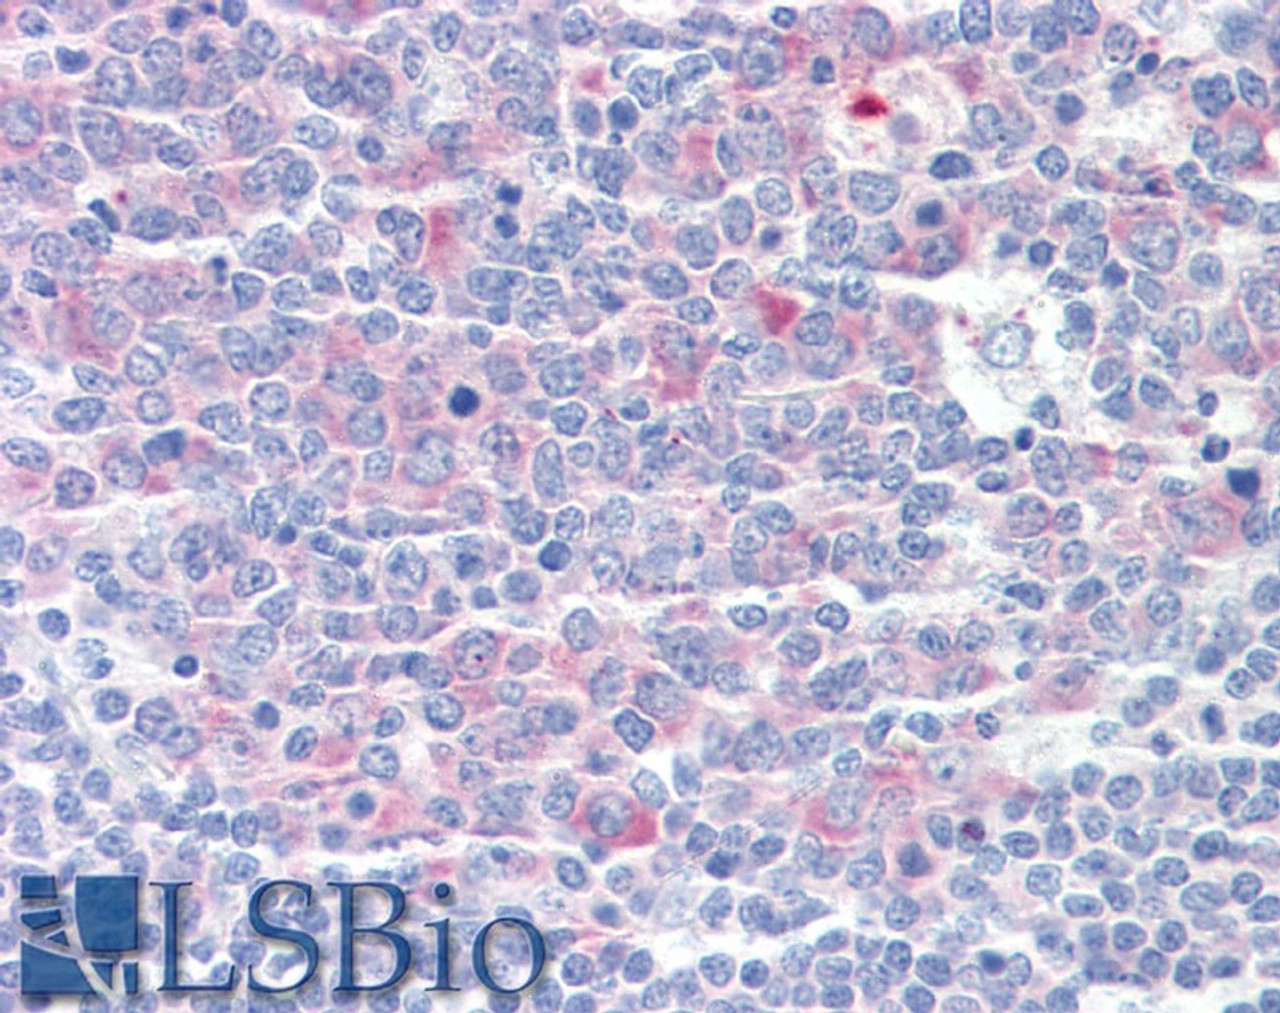 42-161 (3.75ug/ml) staining of paraffin embedded Human Adrenal Gland. Steamed antigen retrieval with citrate buffer pH 6, AP-staining.